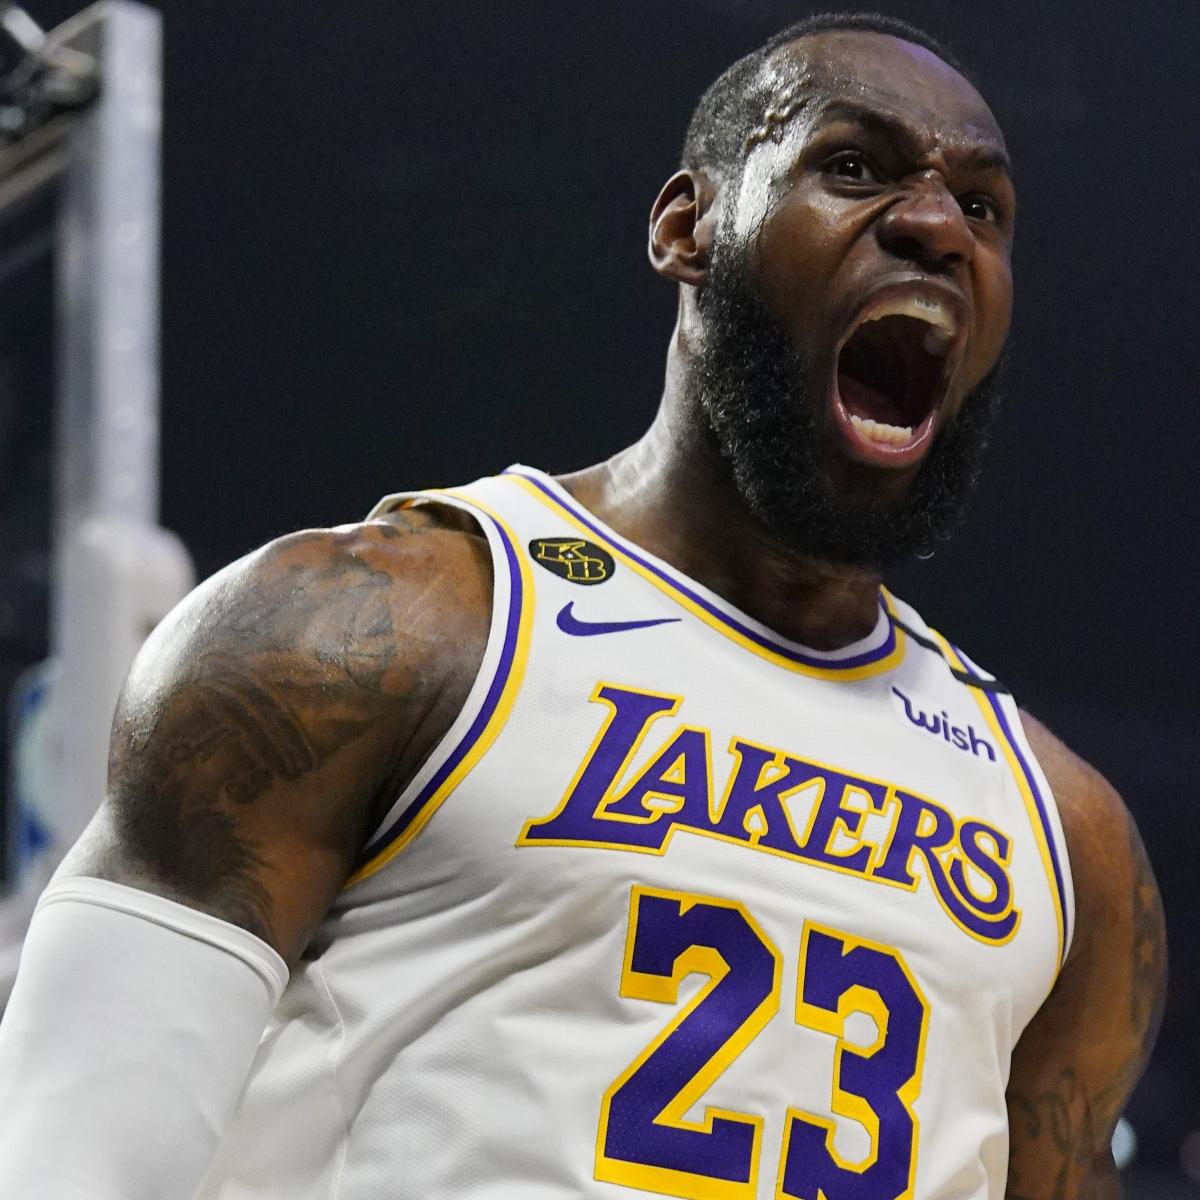 Lakers Jared Dudley Says Lebron James Is The System Calls 80 90 Of Plays Bleacher Report Latest News Videos And Highlights